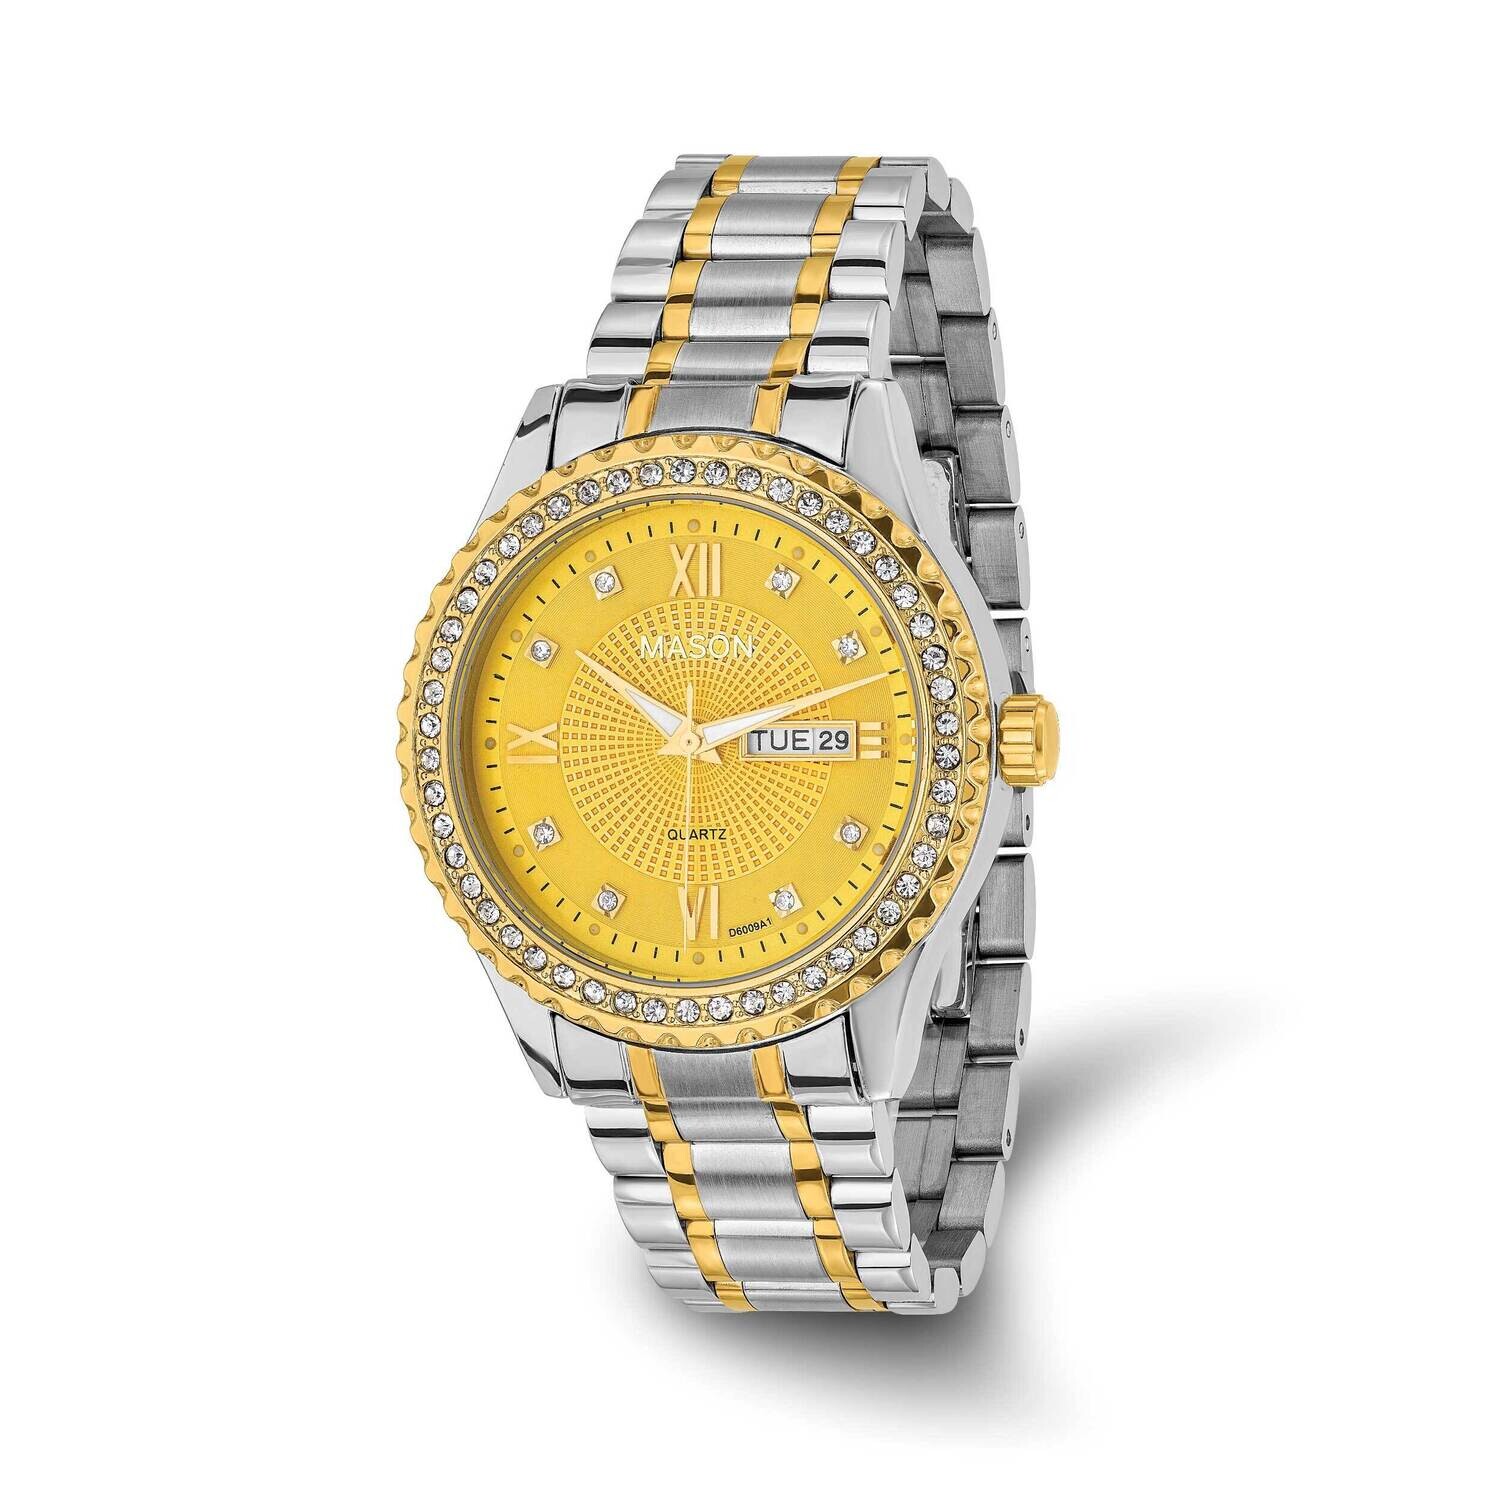 Mason Sales Two-Tone Gold-Plated Crystal Bezel Watch Stainless Steel XWA6534